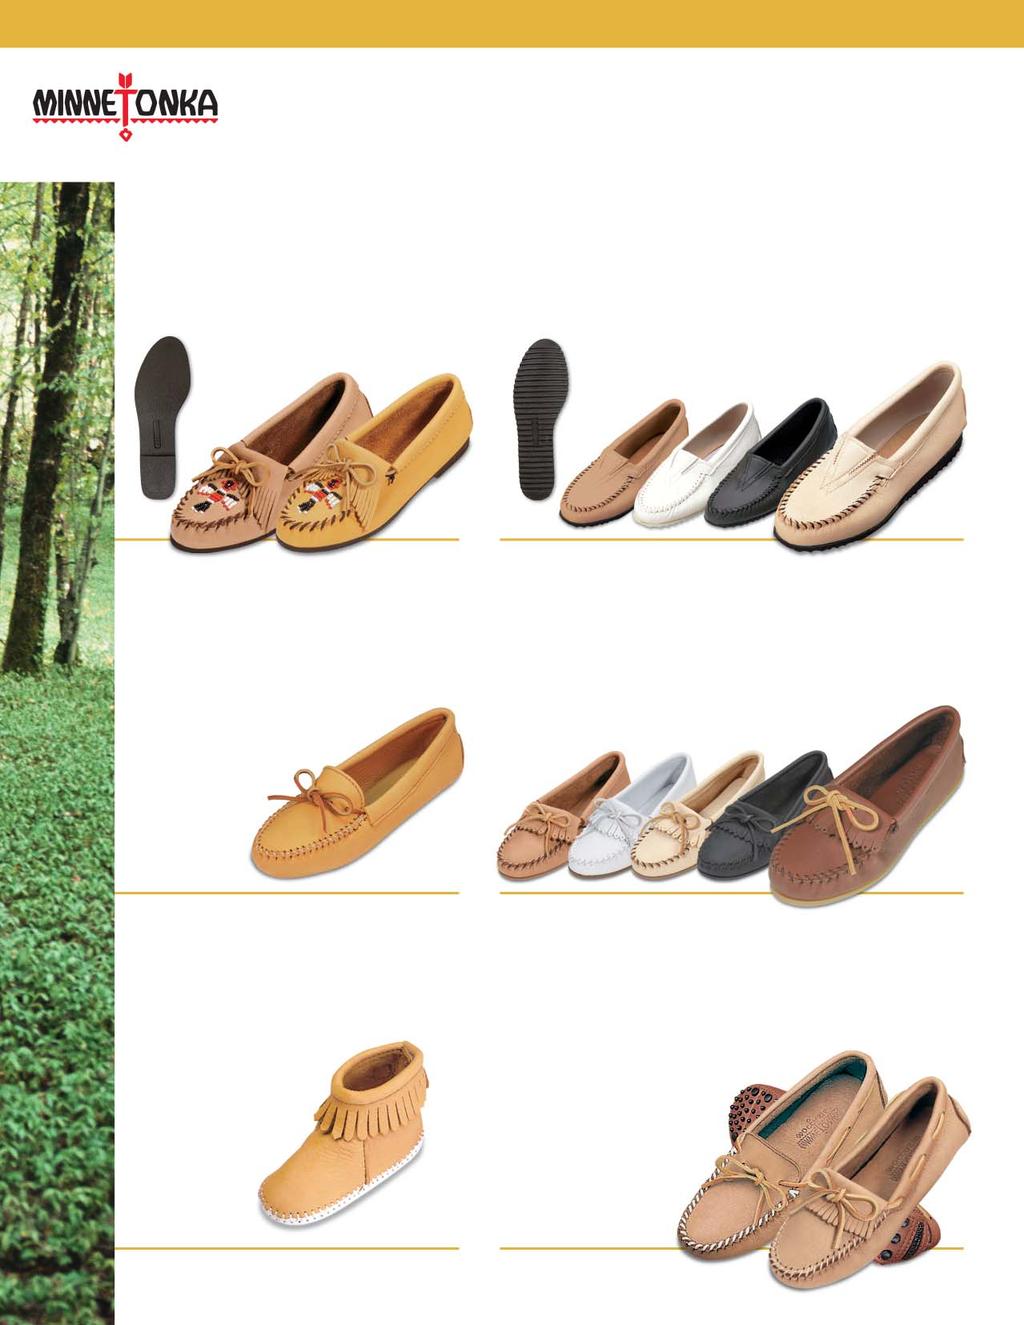 Traditional moccasin styles made from soft, supple, genuine deerskin - the ultimate in luxurious comfort. Slip on a pair and see. Genuine Thunderbird Soft, supple, genuine deerskin.